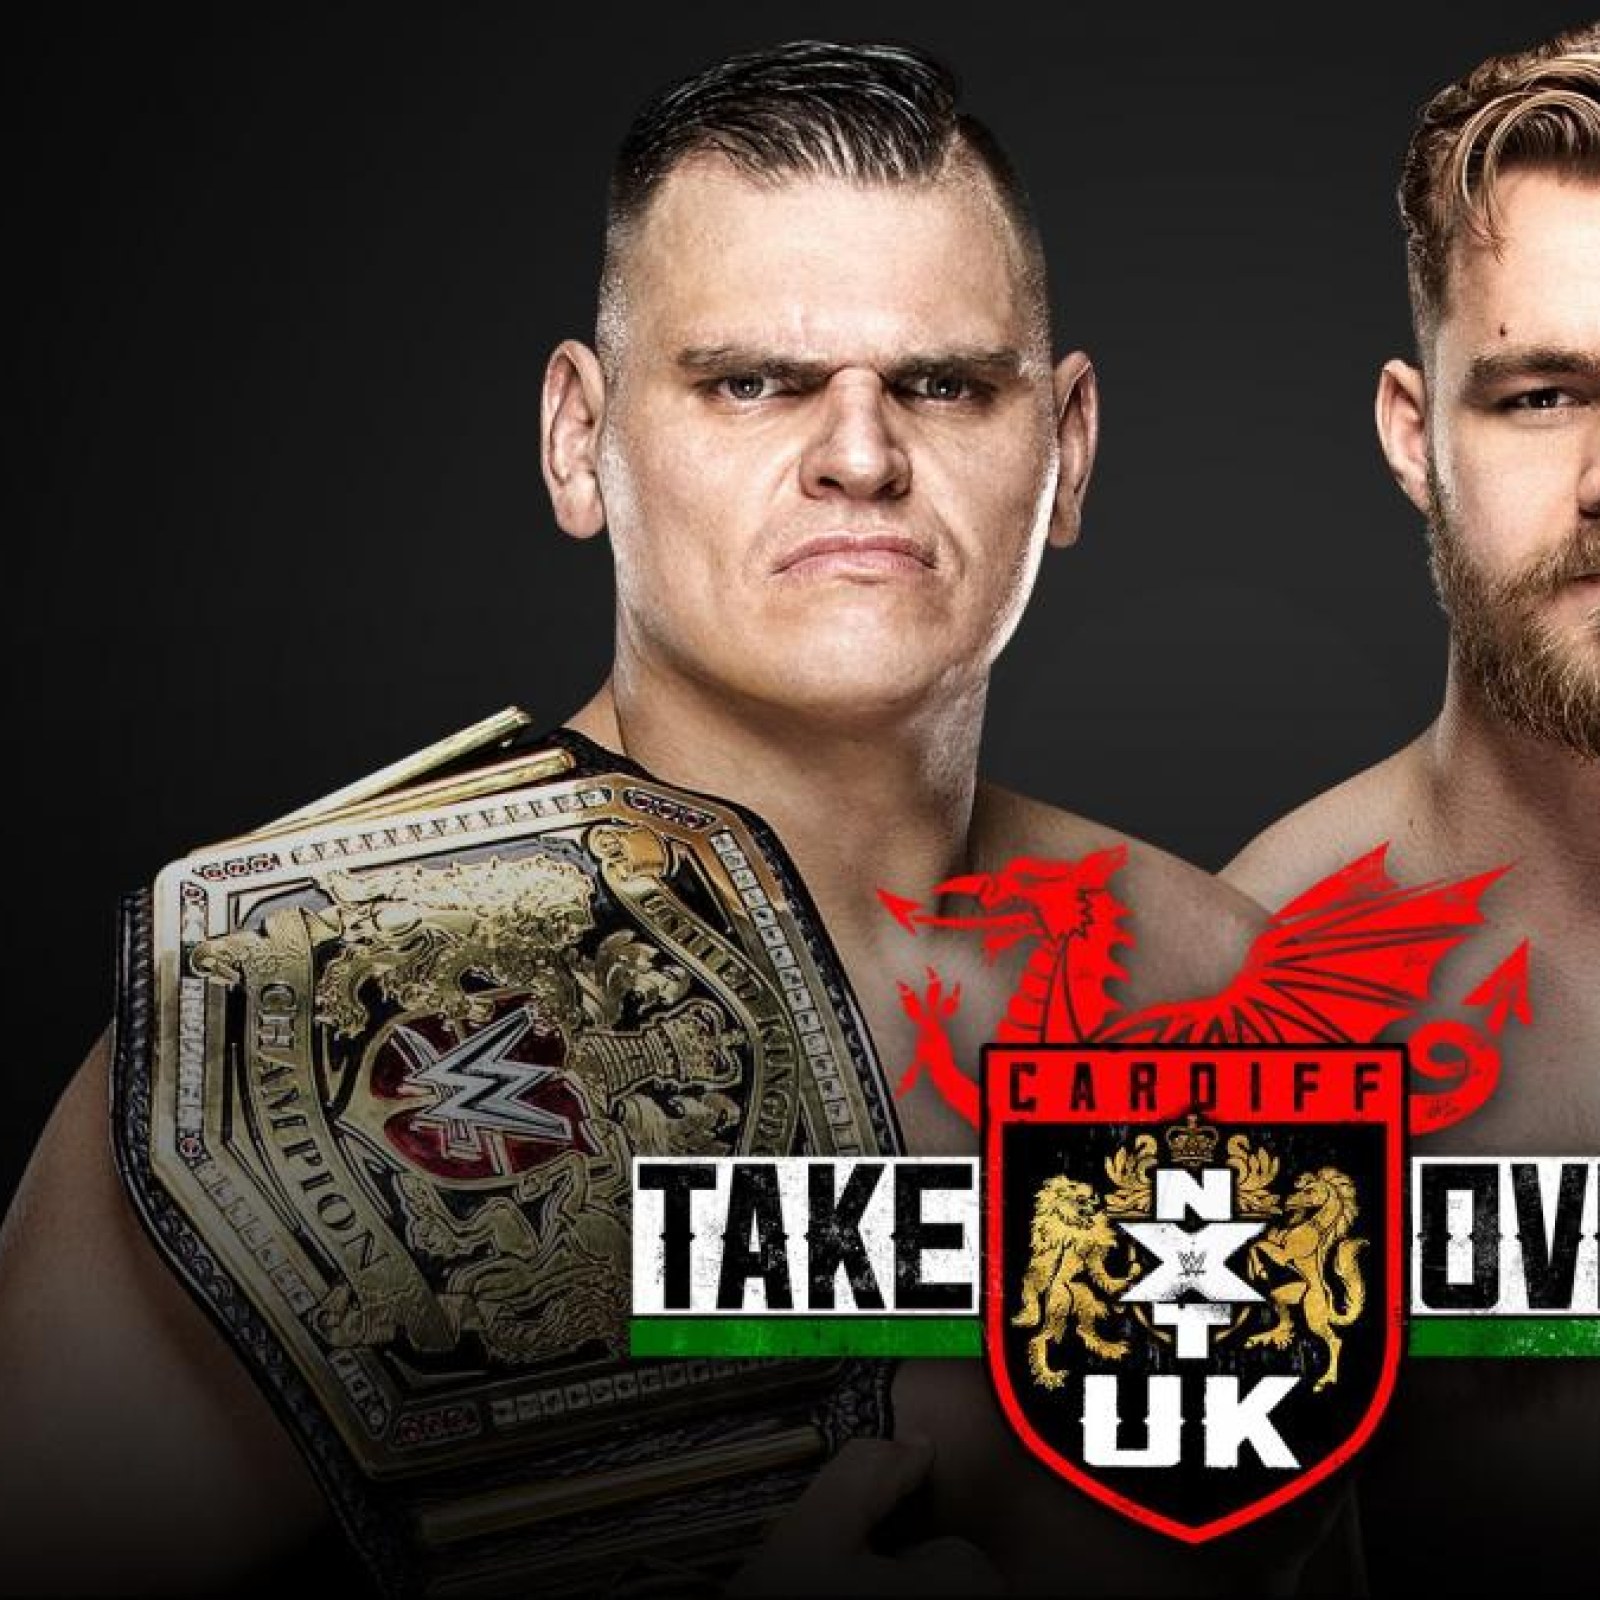 Nxt uk takeover